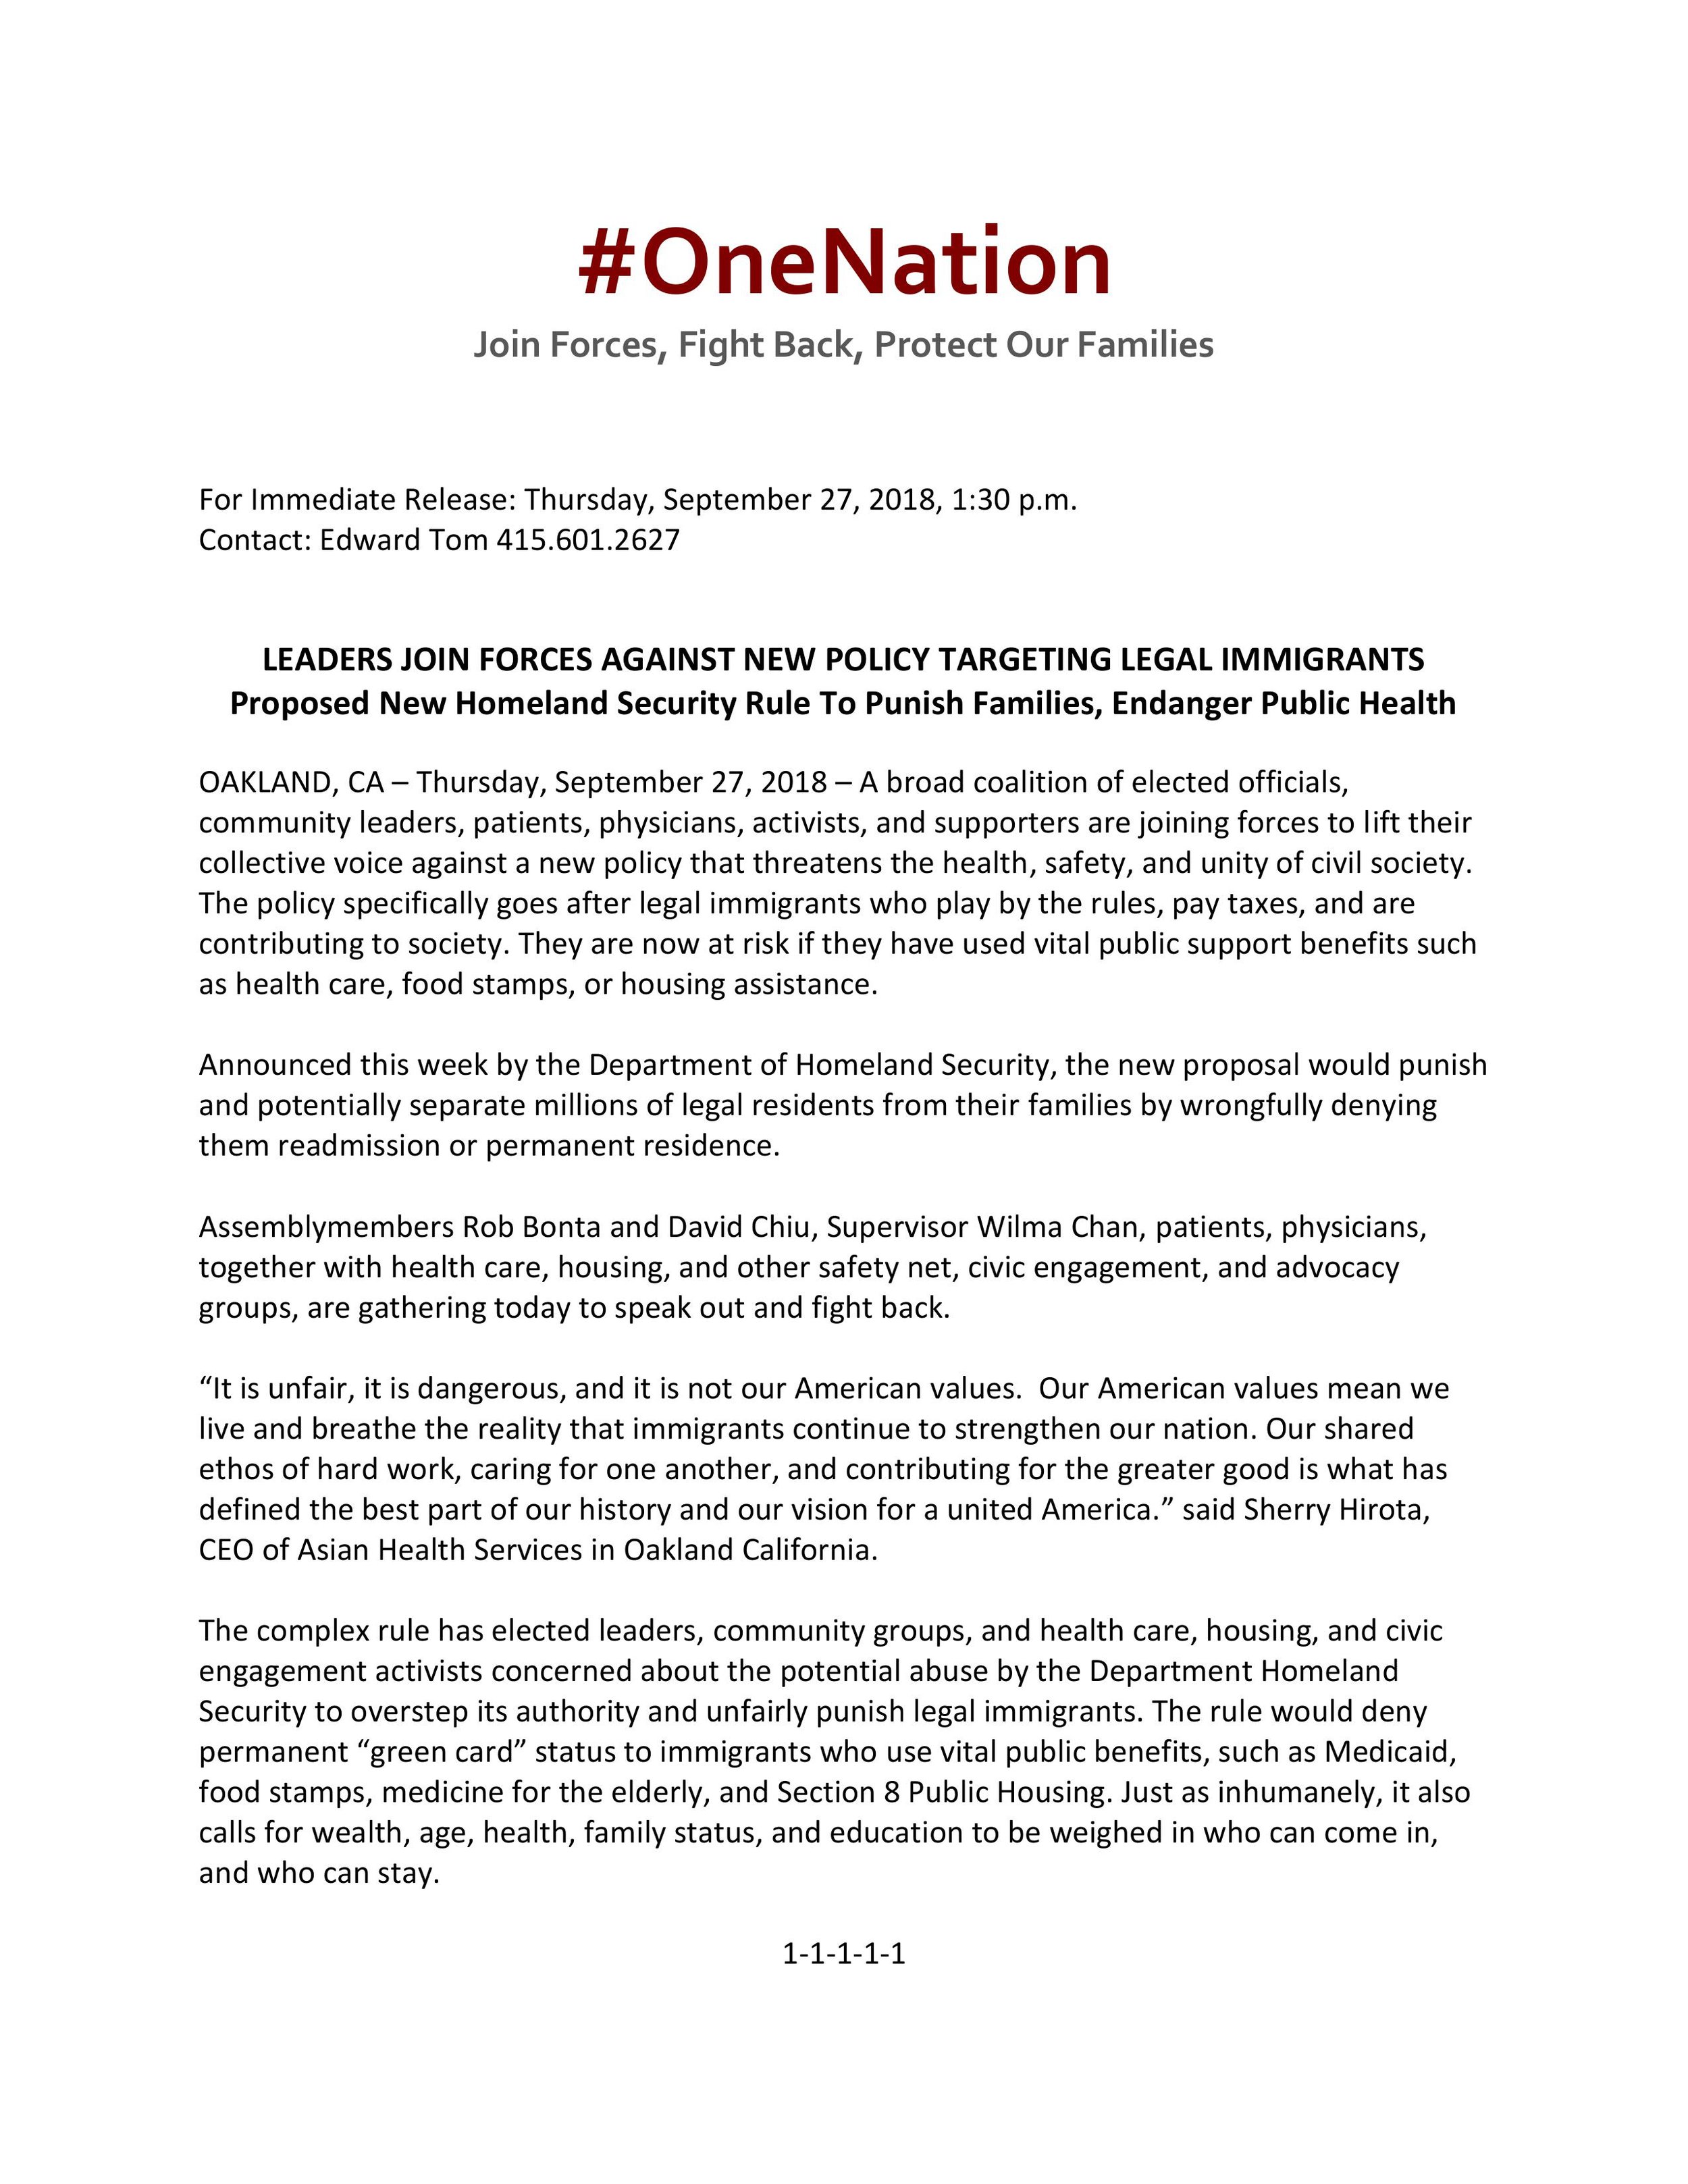 OneNation Sept 27th News Conference.jpg